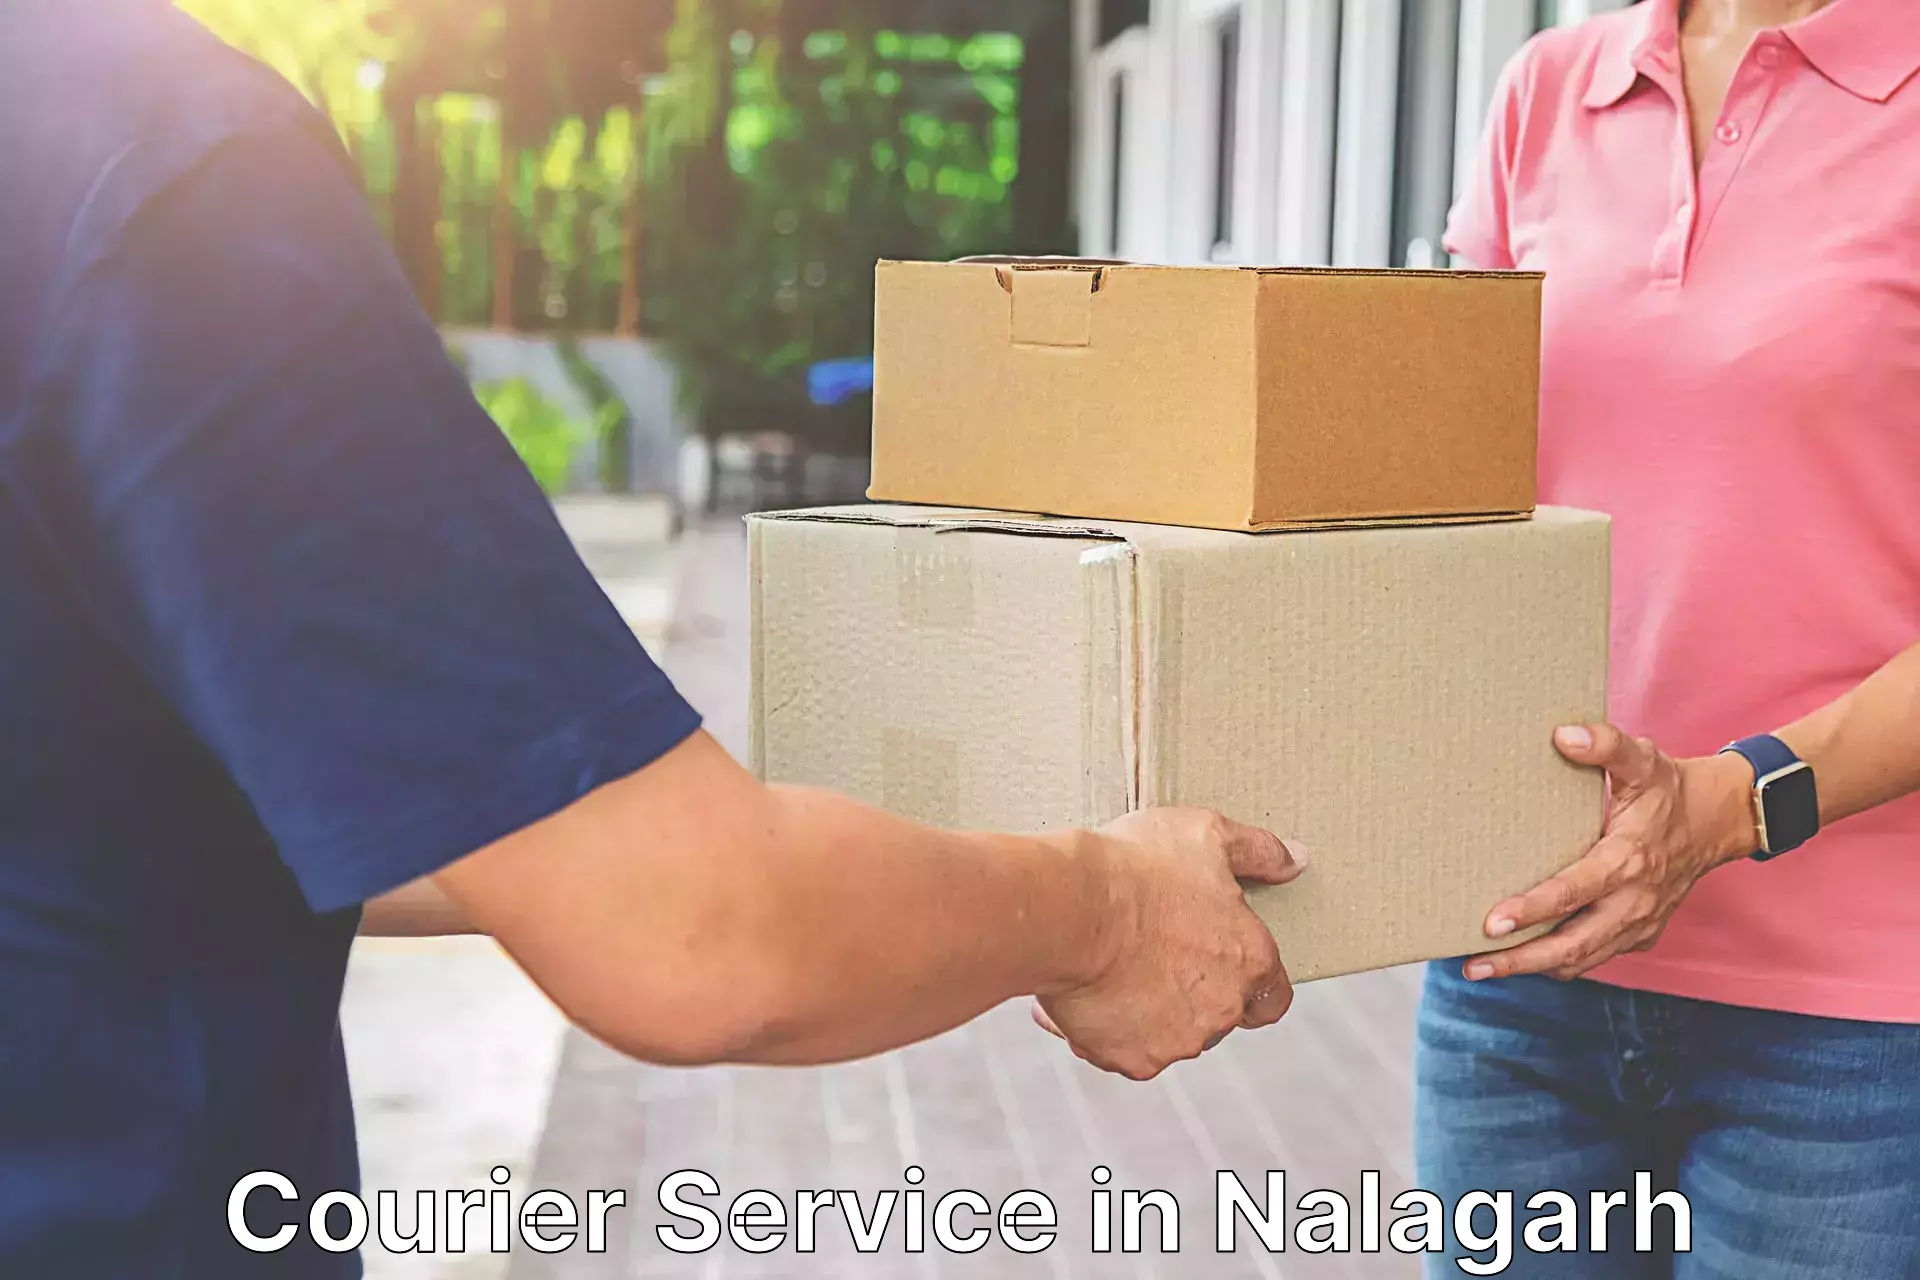 Sustainable courier practices in Nalagarh